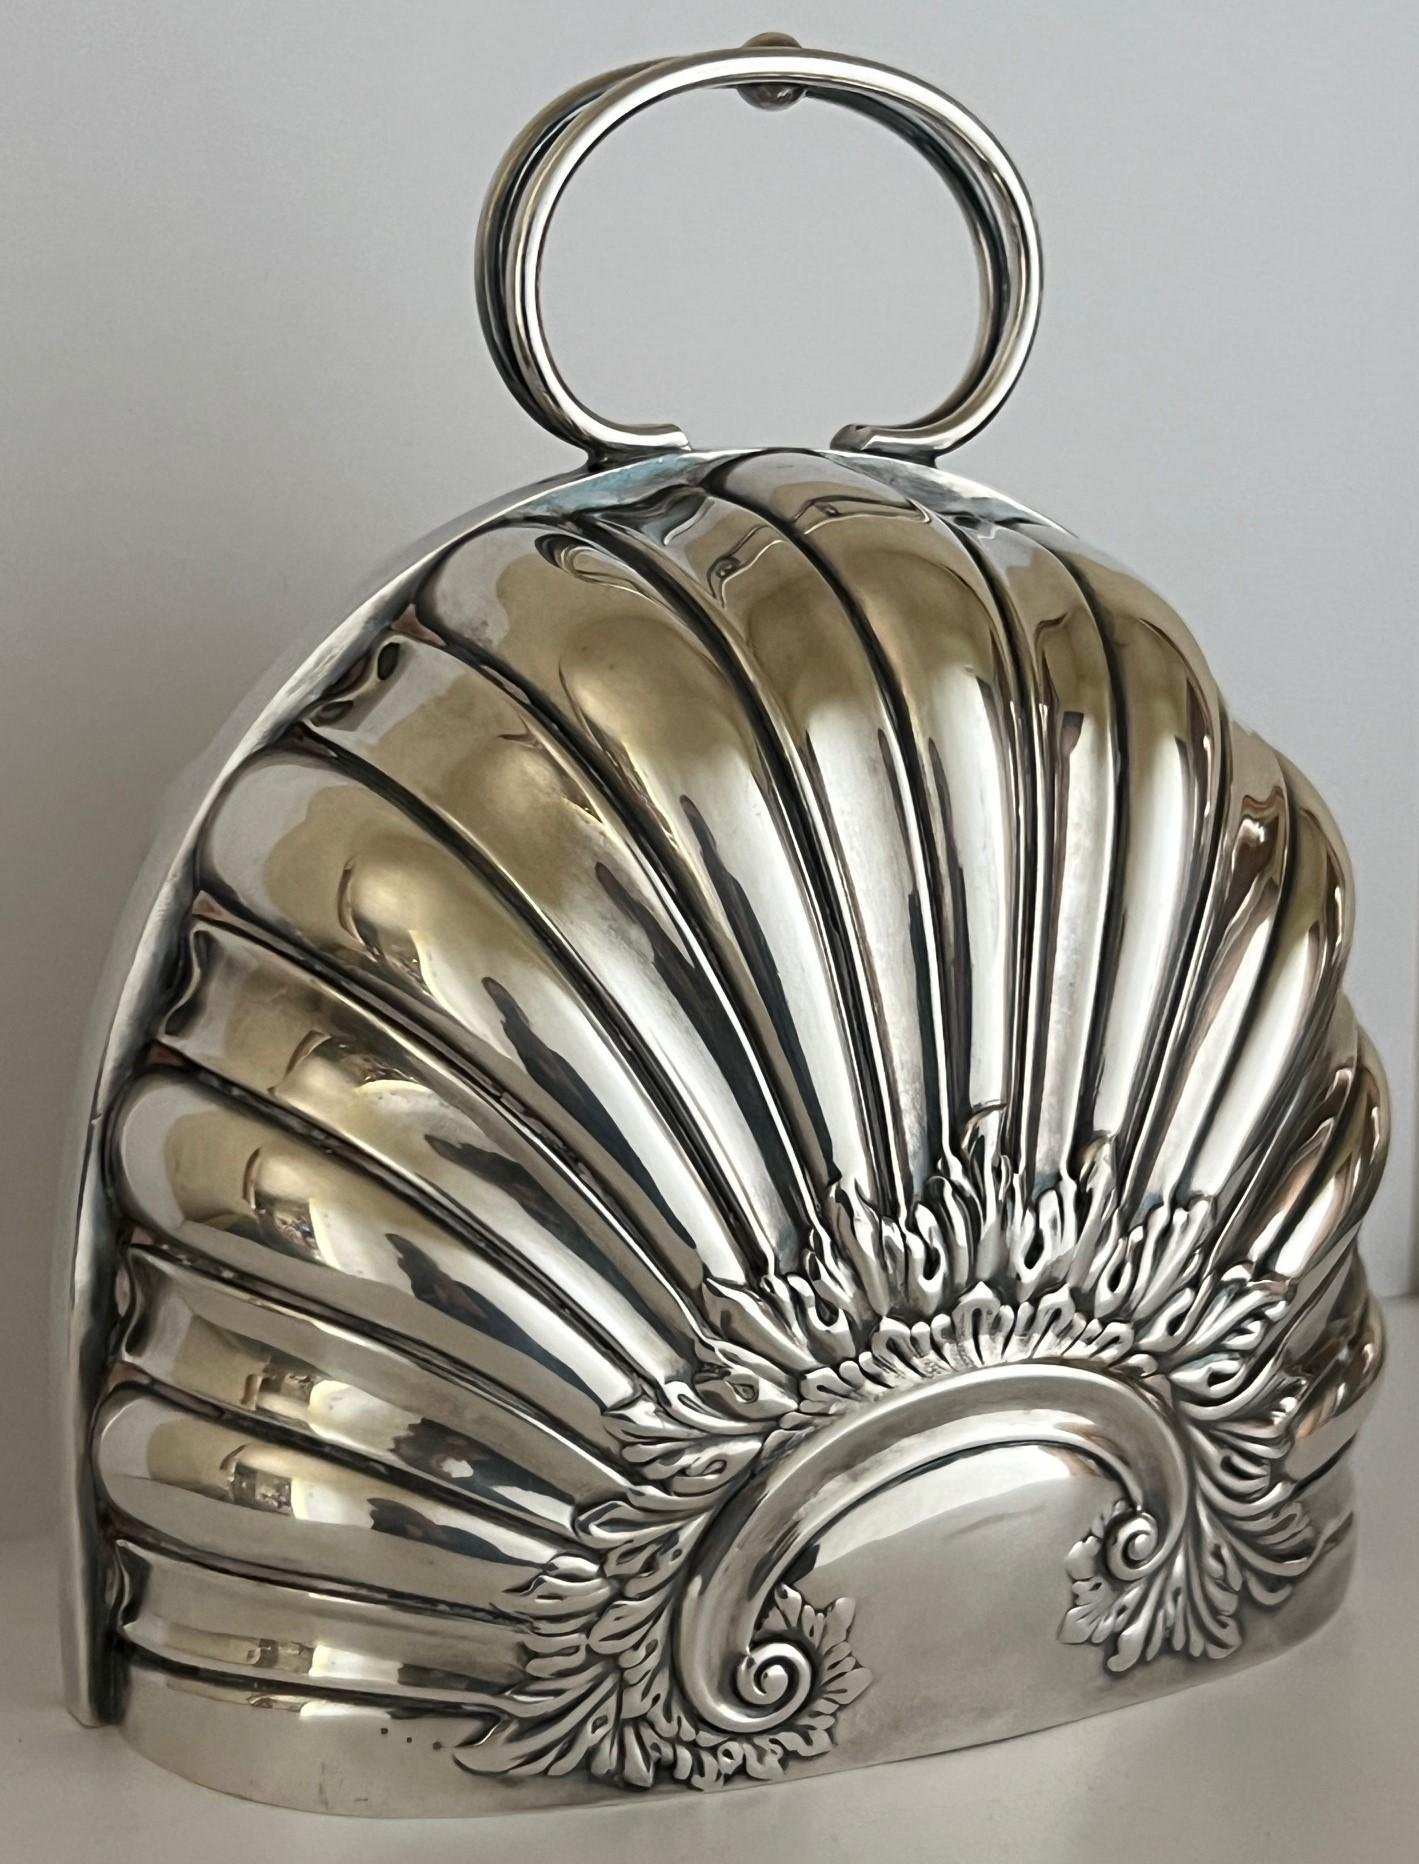 Antique Silver Plated Biscuit or Food Cover In Good Condition For Sale In Ross, CA